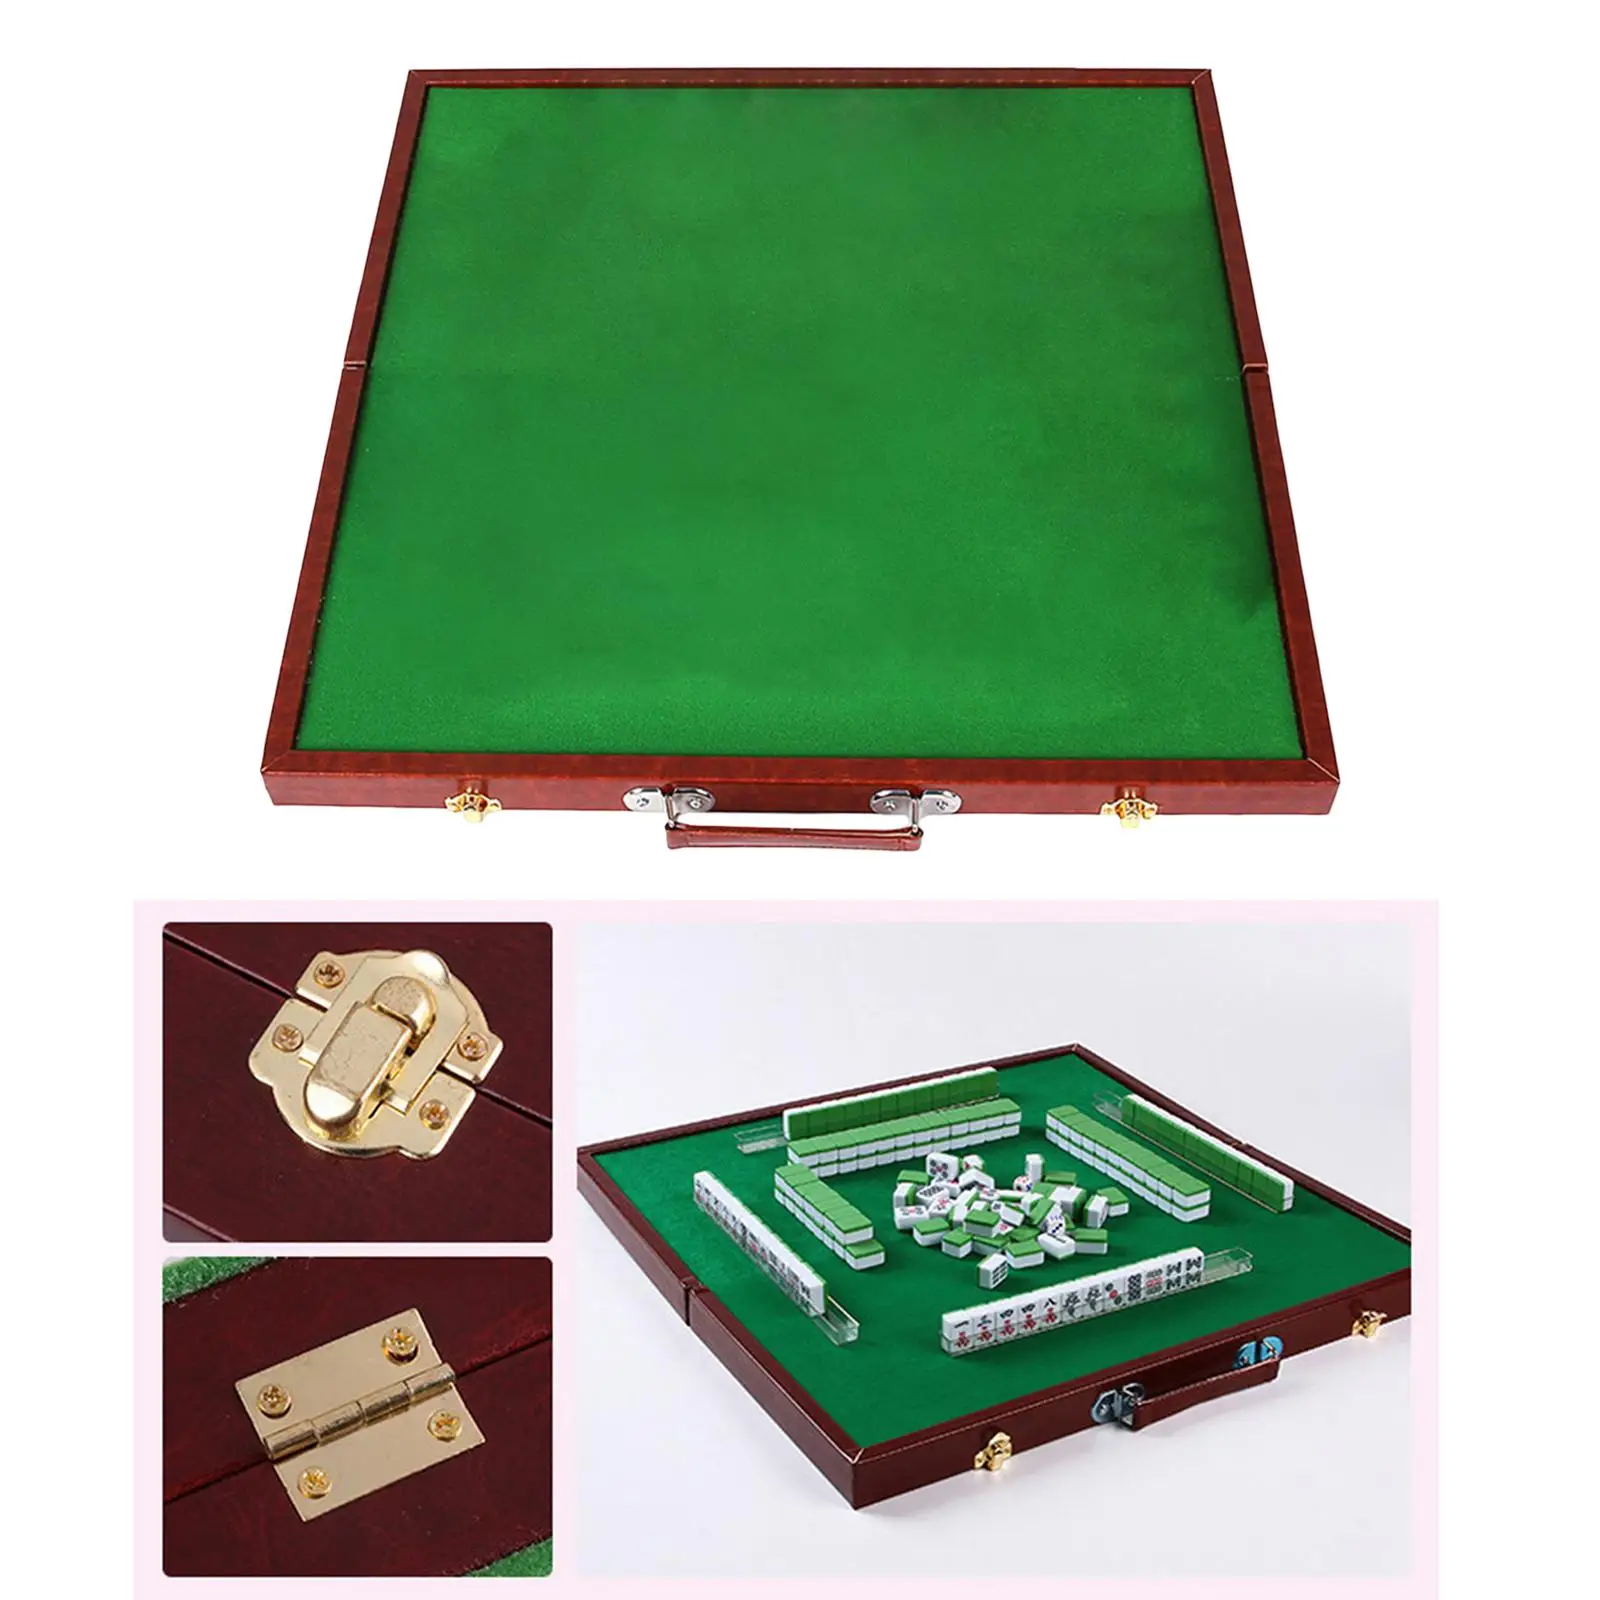 50Cmx50cm Mini Mahjong Table Tile Game Indoor Entertainment Accessories Leisure Time Game Activity Game Foldable for Home Party